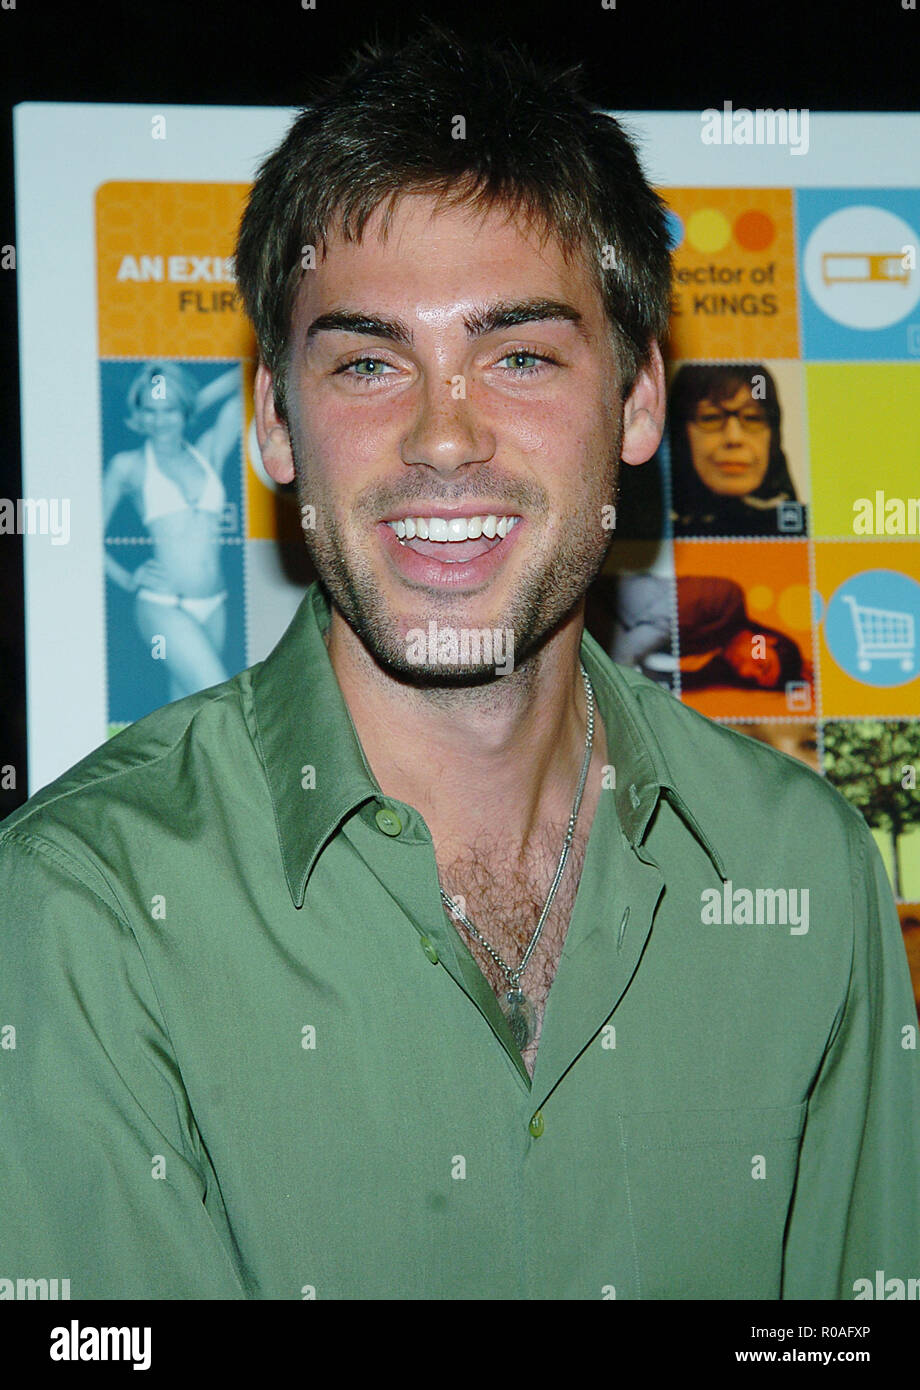 Drew Fuller arriving at the I Love Huckabees Premiere at the Grove Theatre in Los Angeles. January 20, 2004FullerDrew101 Red Carpet Event, Vertical, USA, Film Industry, Celebrities,  Photography, Bestof, Arts Culture and Entertainment, Topix Celebrities fashion /  Vertical, Best of, Event in Hollywood Life - California,  Red Carpet and backstage, USA, Film Industry, Celebrities,  movie celebrities, TV celebrities, Music celebrities, Photography, Bestof, Arts Culture and Entertainment,  Topix, headshot, vertical, one person,, from the year , 2004, inquiry tsuni@Gamma-USA.com Stock Photo